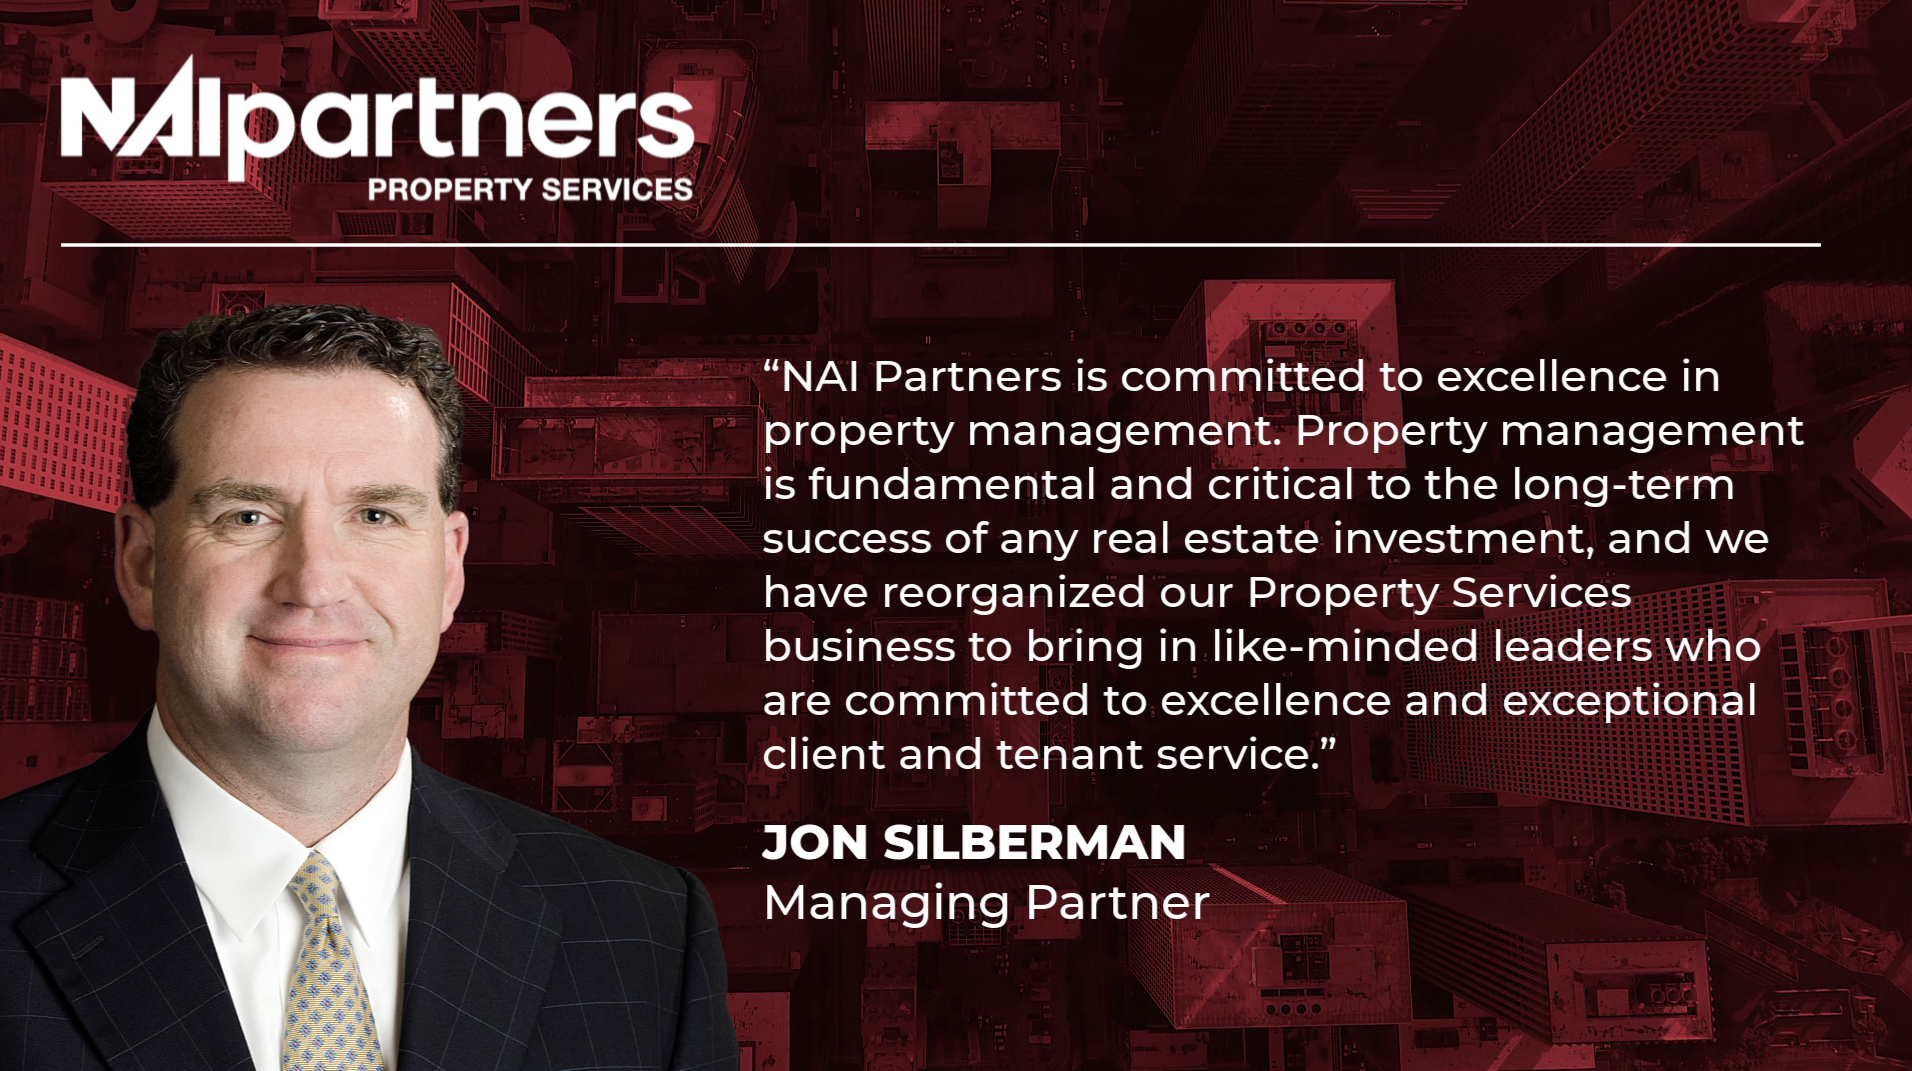 NAI Partners’ Property Services Division is 2nd-largest in Houston among privately-held and independently-owned full-service CRE firms Partners Real Estate